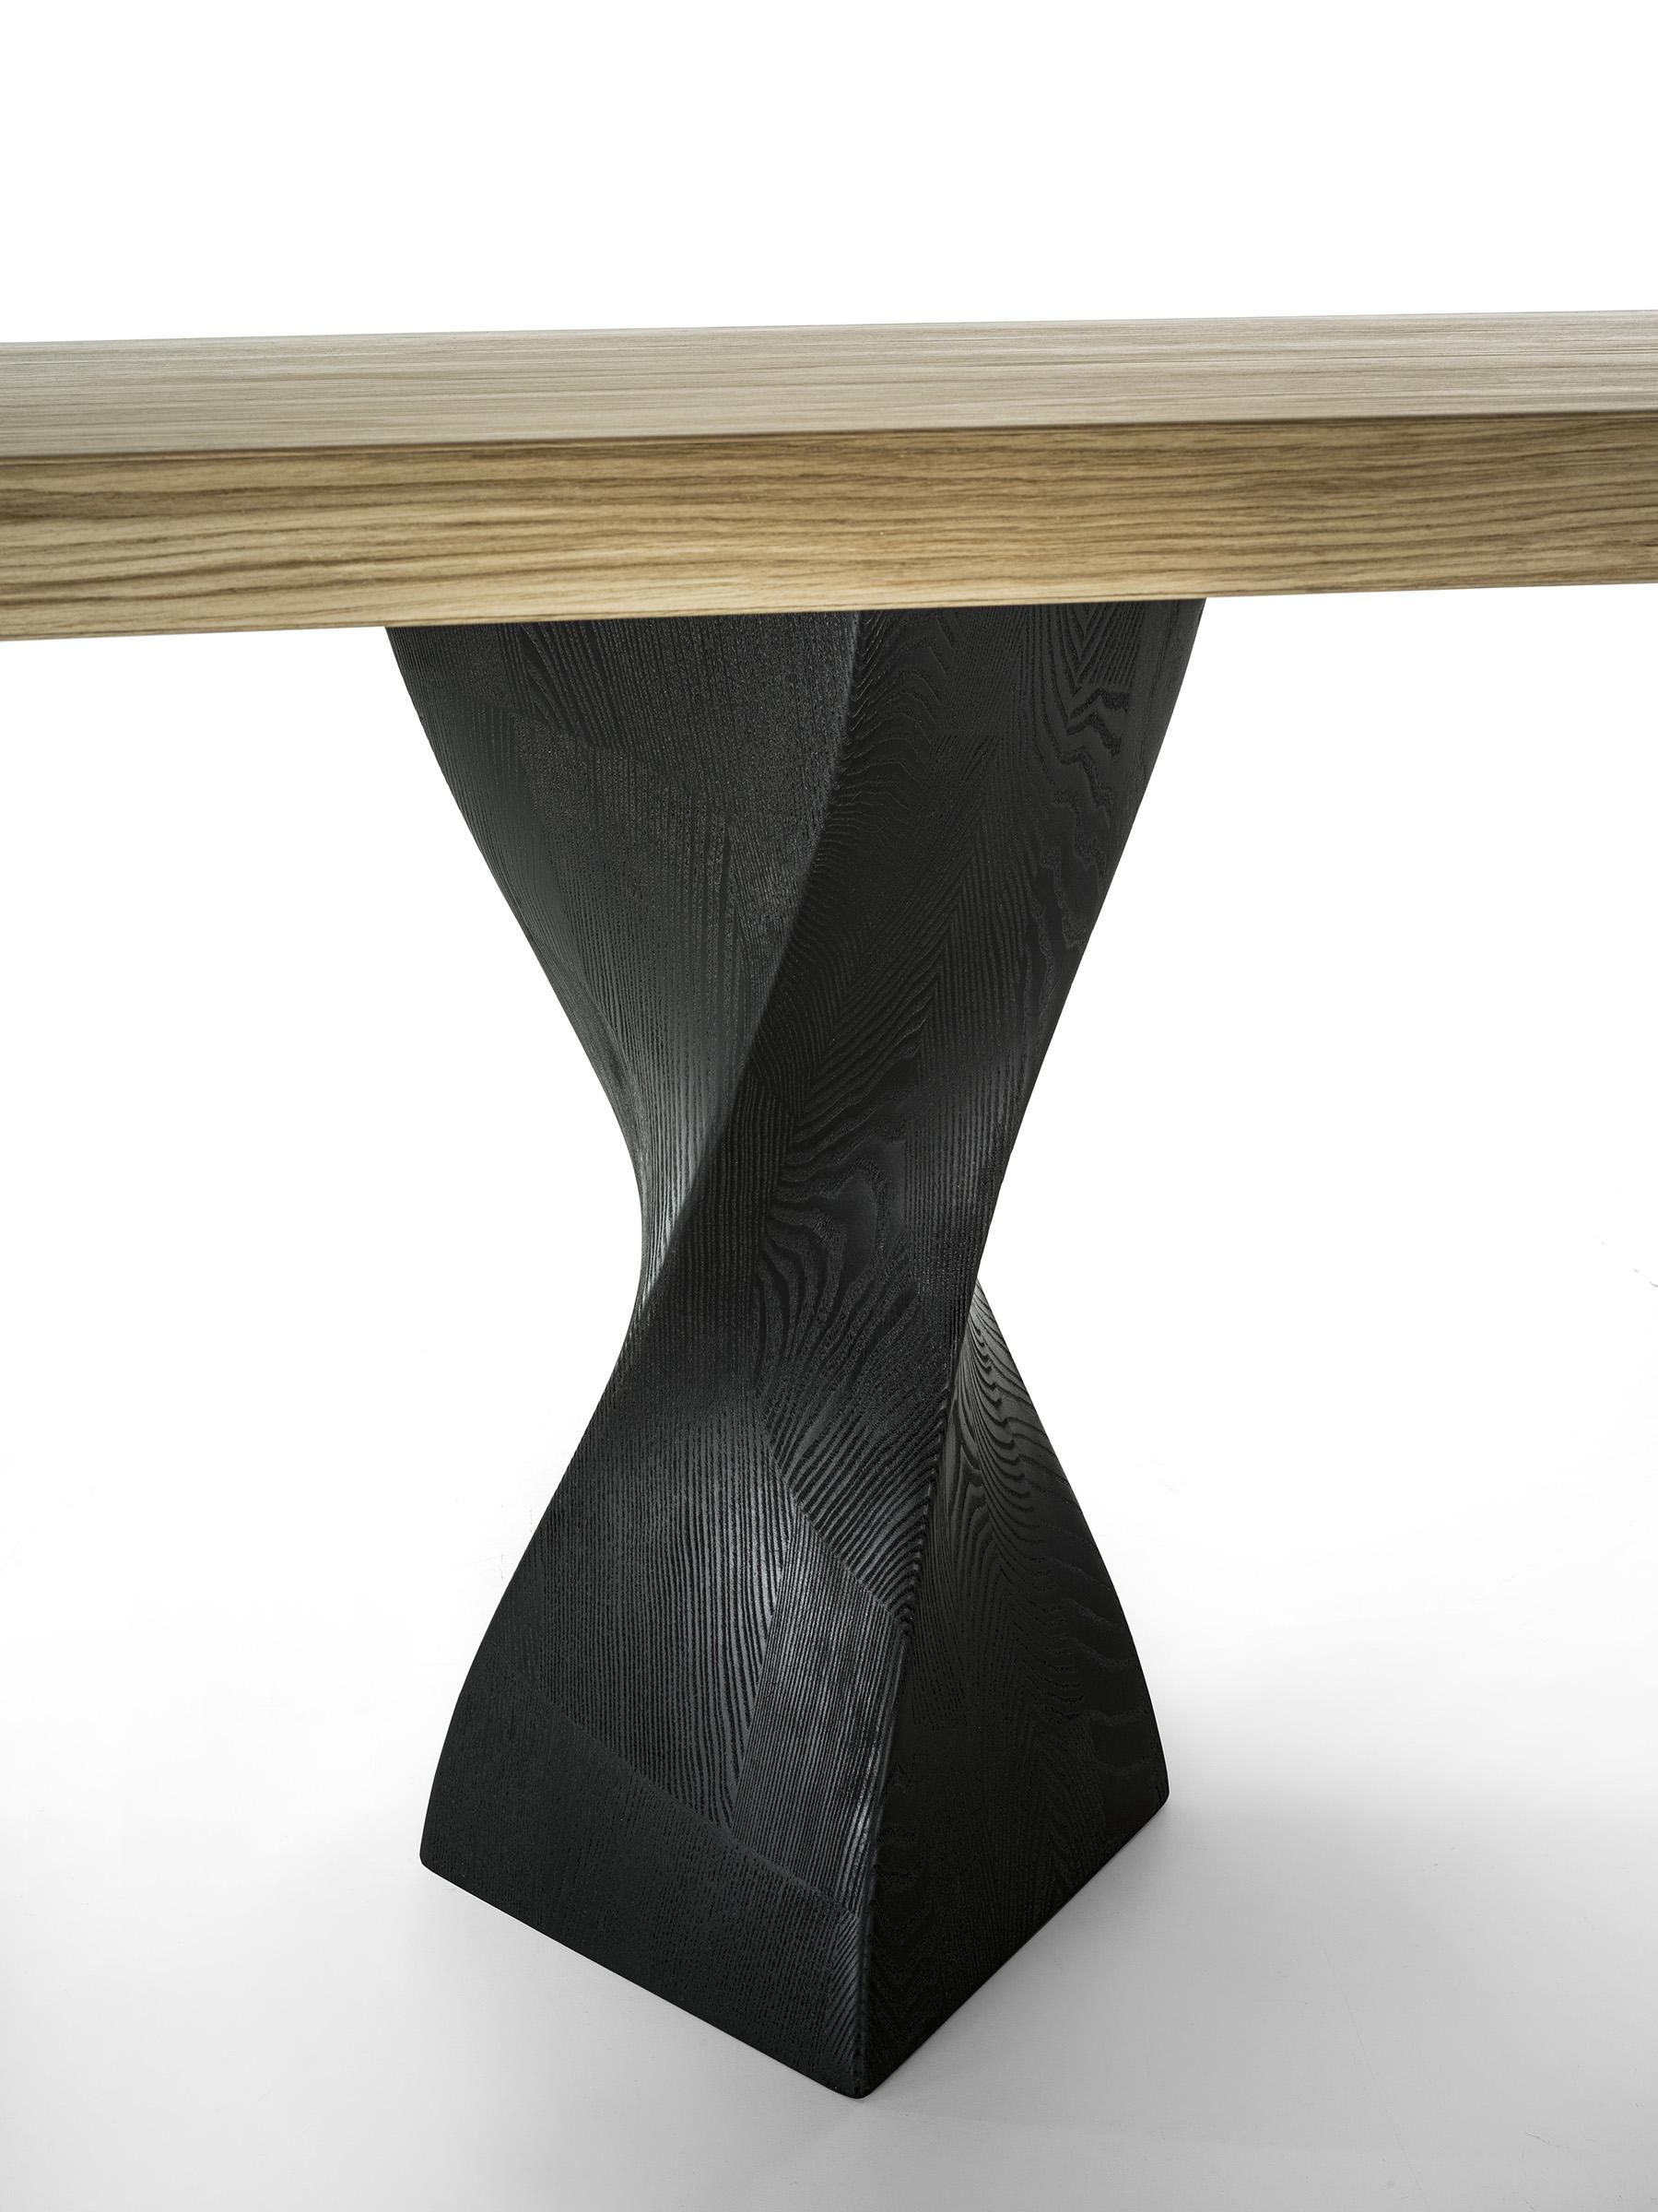 Simple Twist Wood Table, Designed by Studio Excalibur, Made in Italy For Sale 3